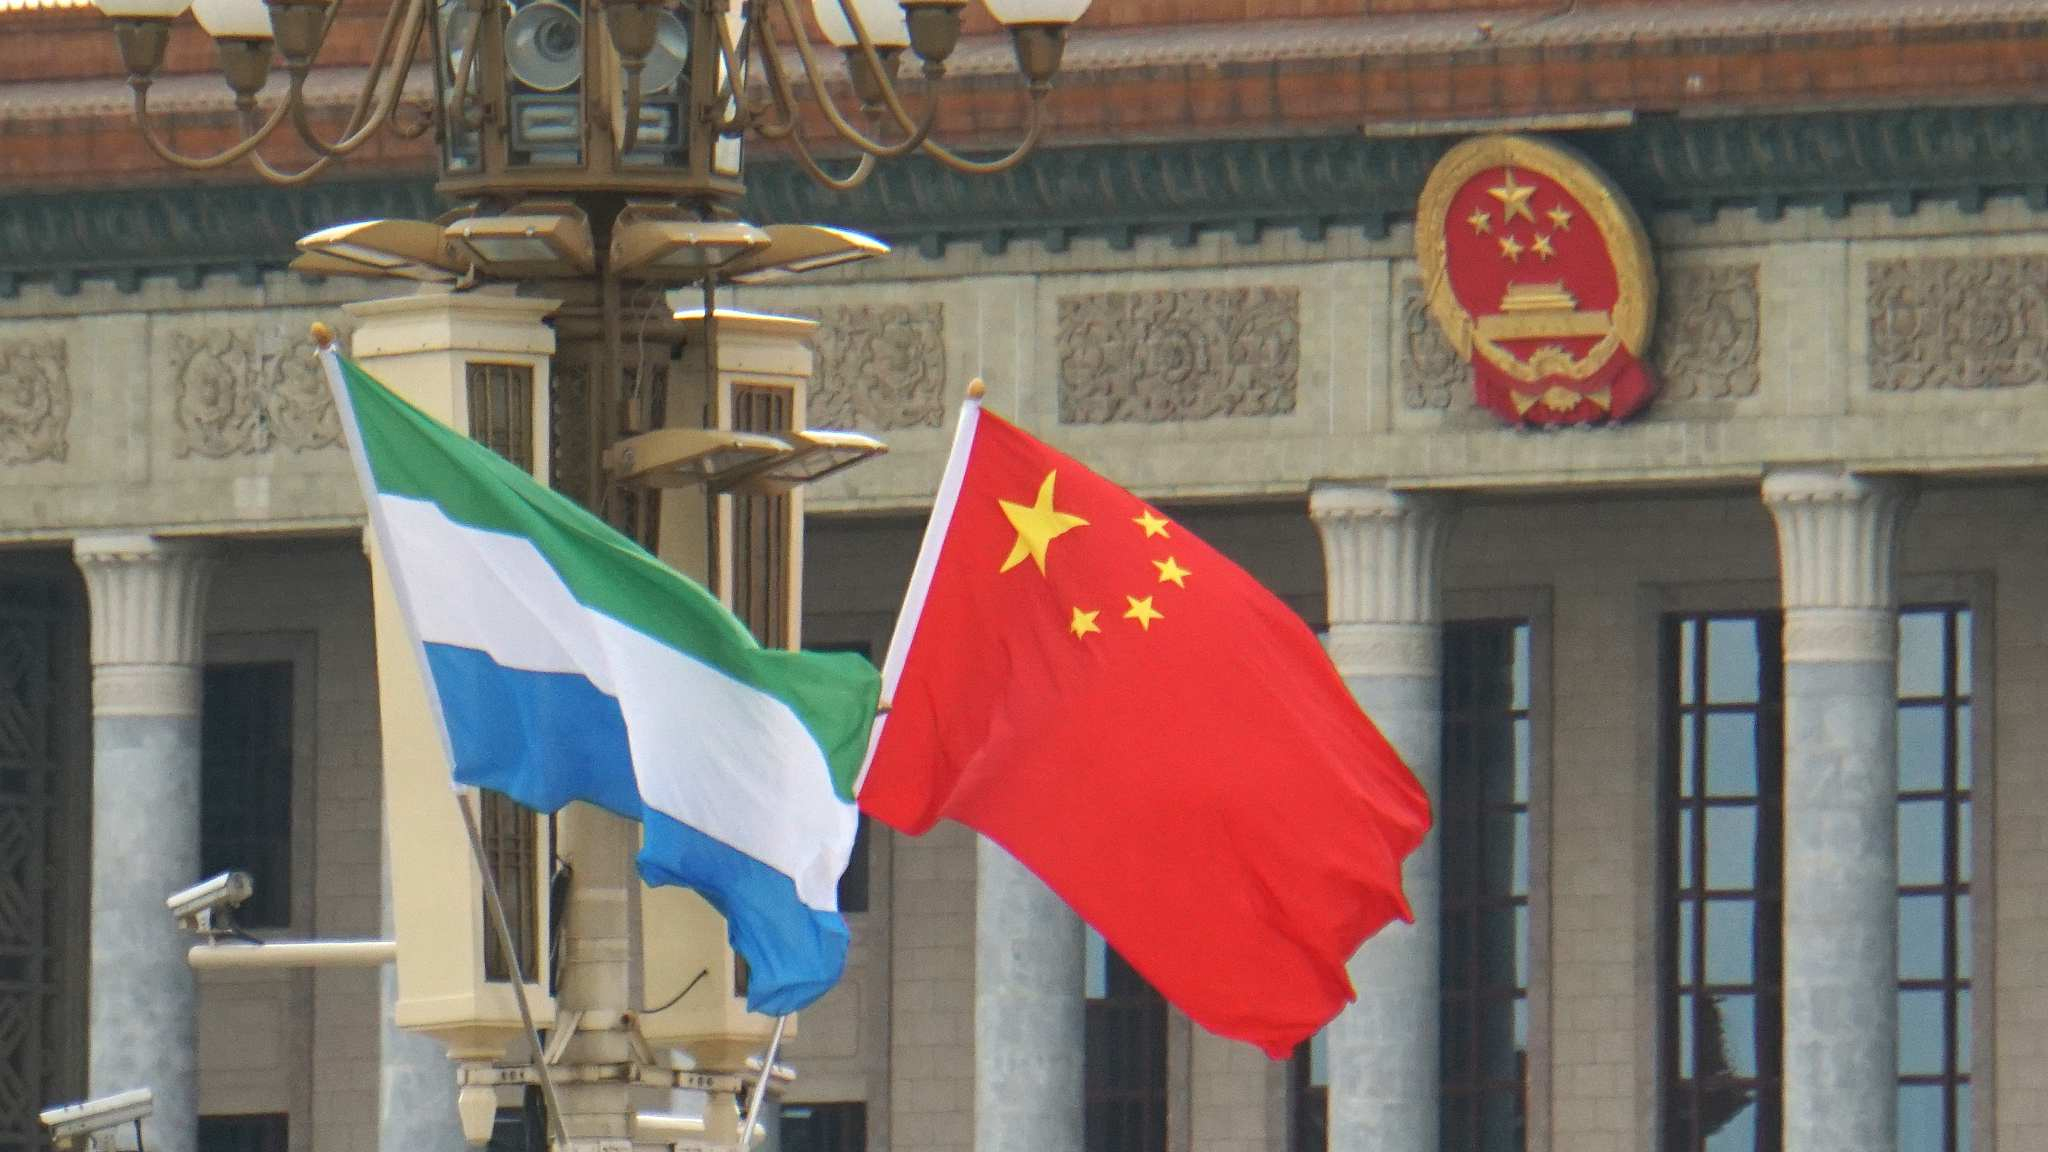 SIERRA LEONE WILL BENEFIT MORE FROM RELATIONSHIP WITH CHINA